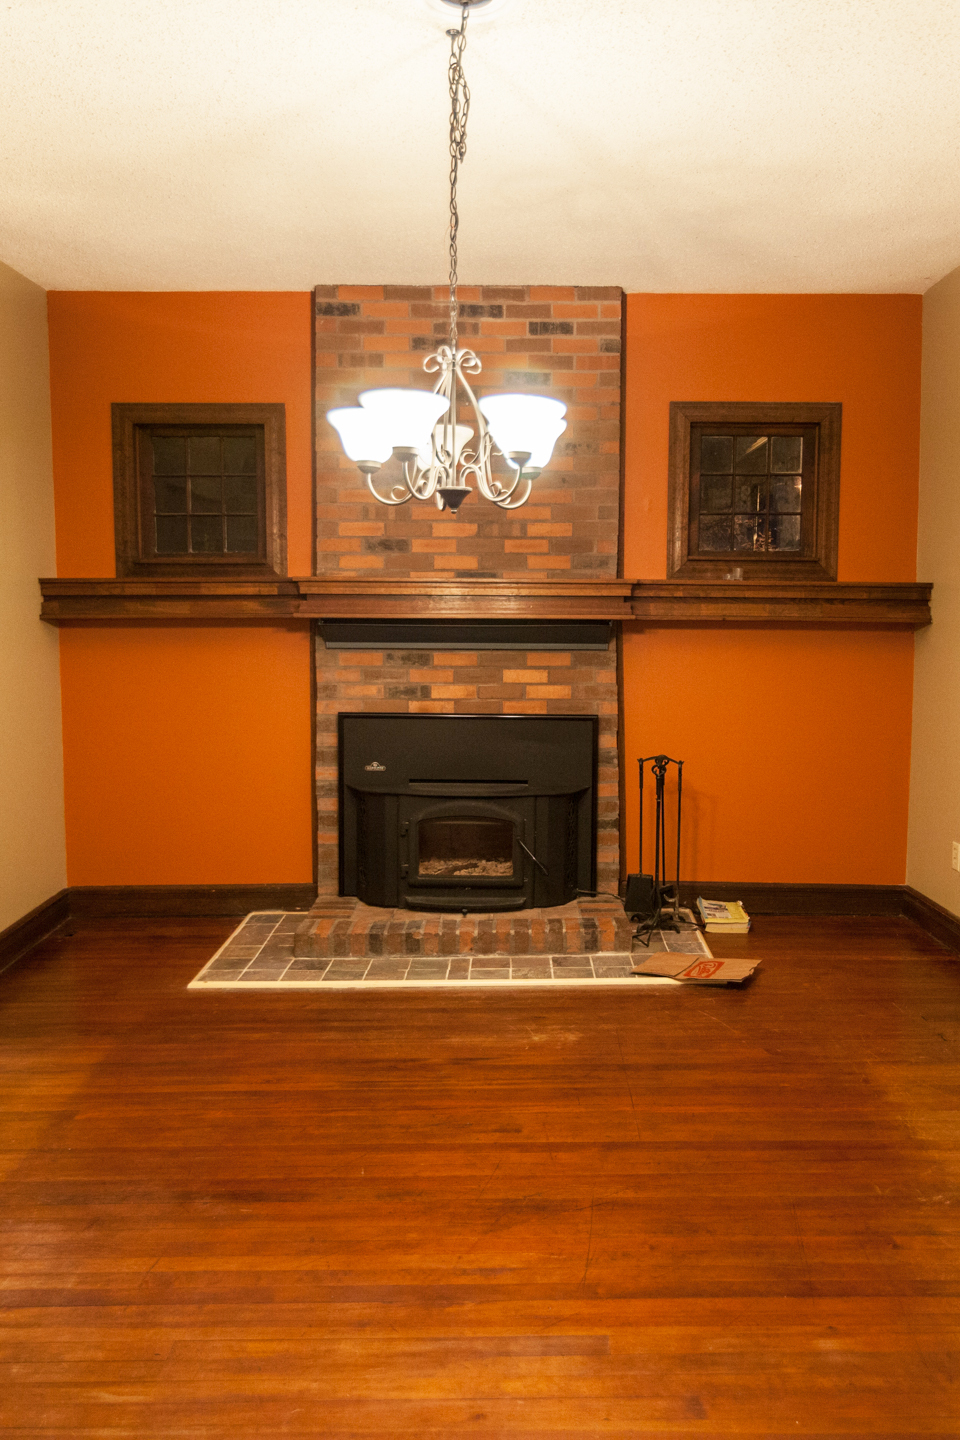 A before image of a living room with brick fireplace